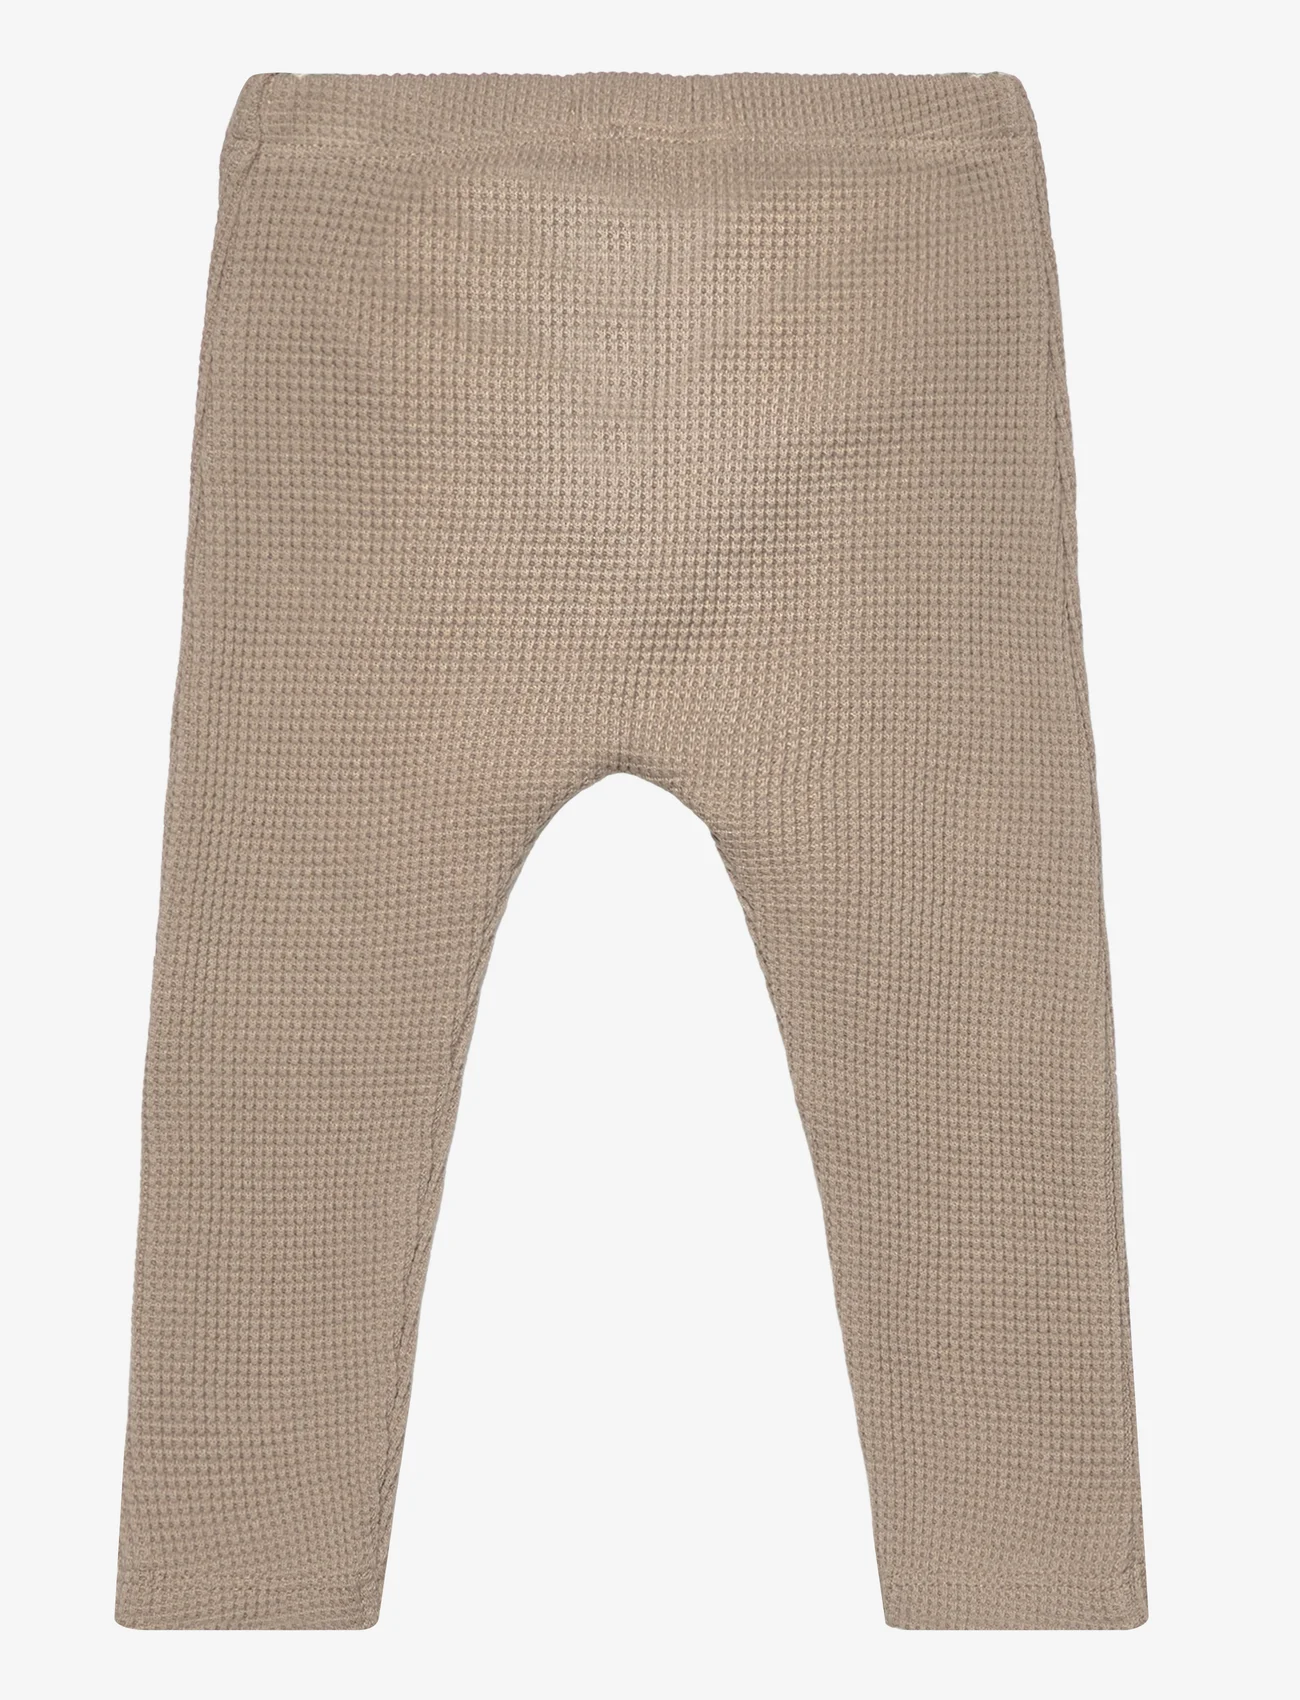 name it - NBNWAFFE LEGGING NOOS - lowest prices - pure cashmere - 1